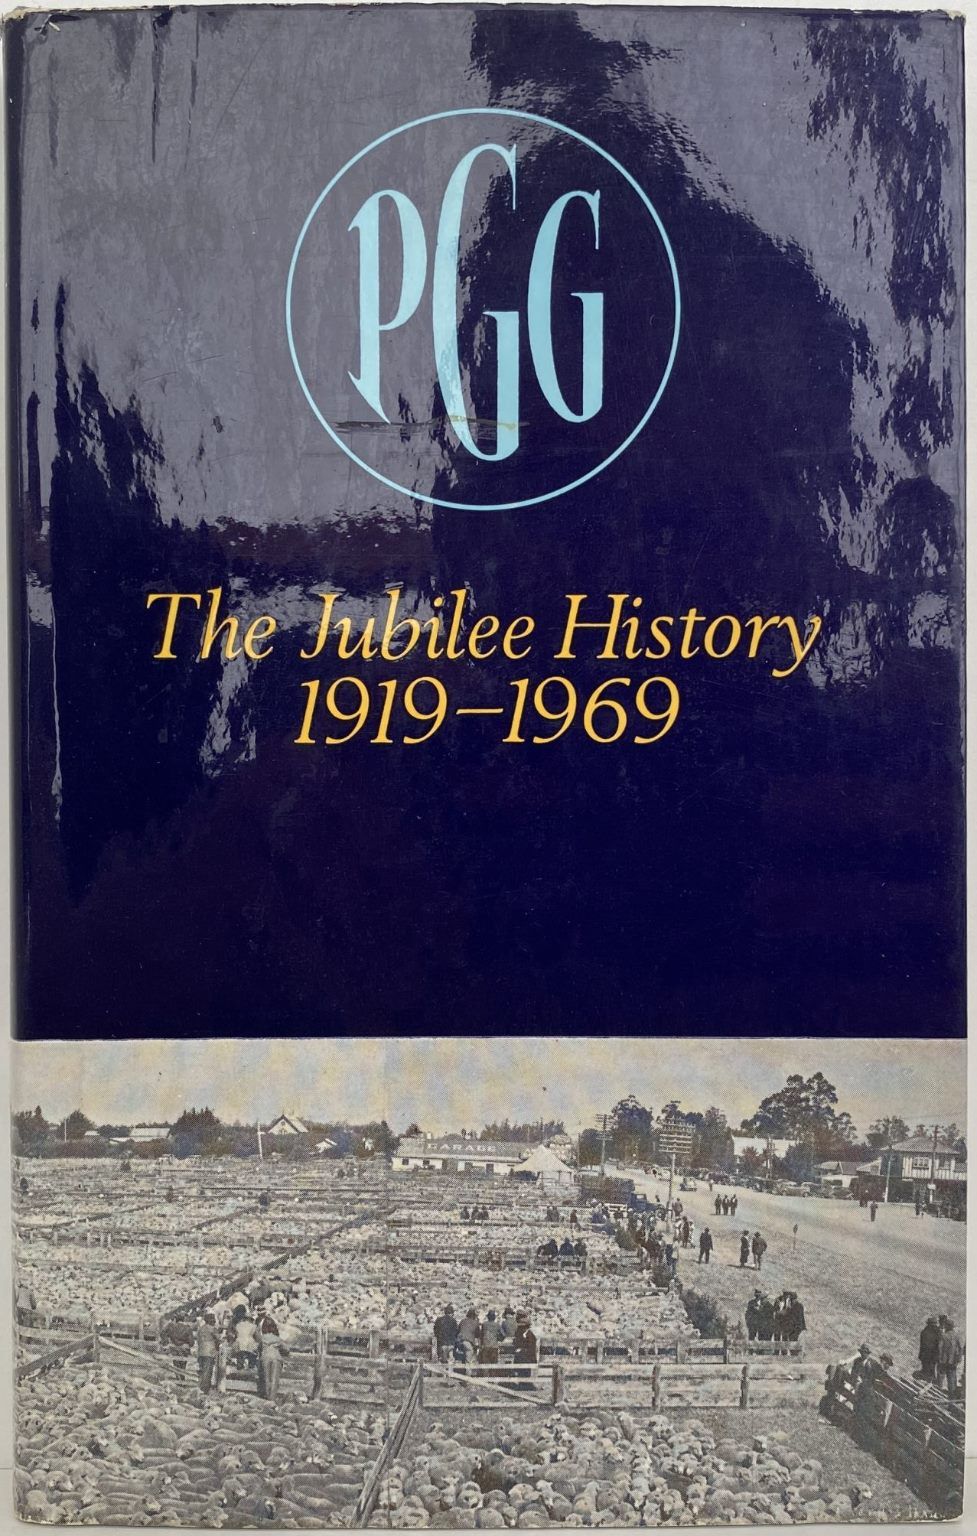 PGG The Jubilee History of Pyne Gould Guinness 1919-1969